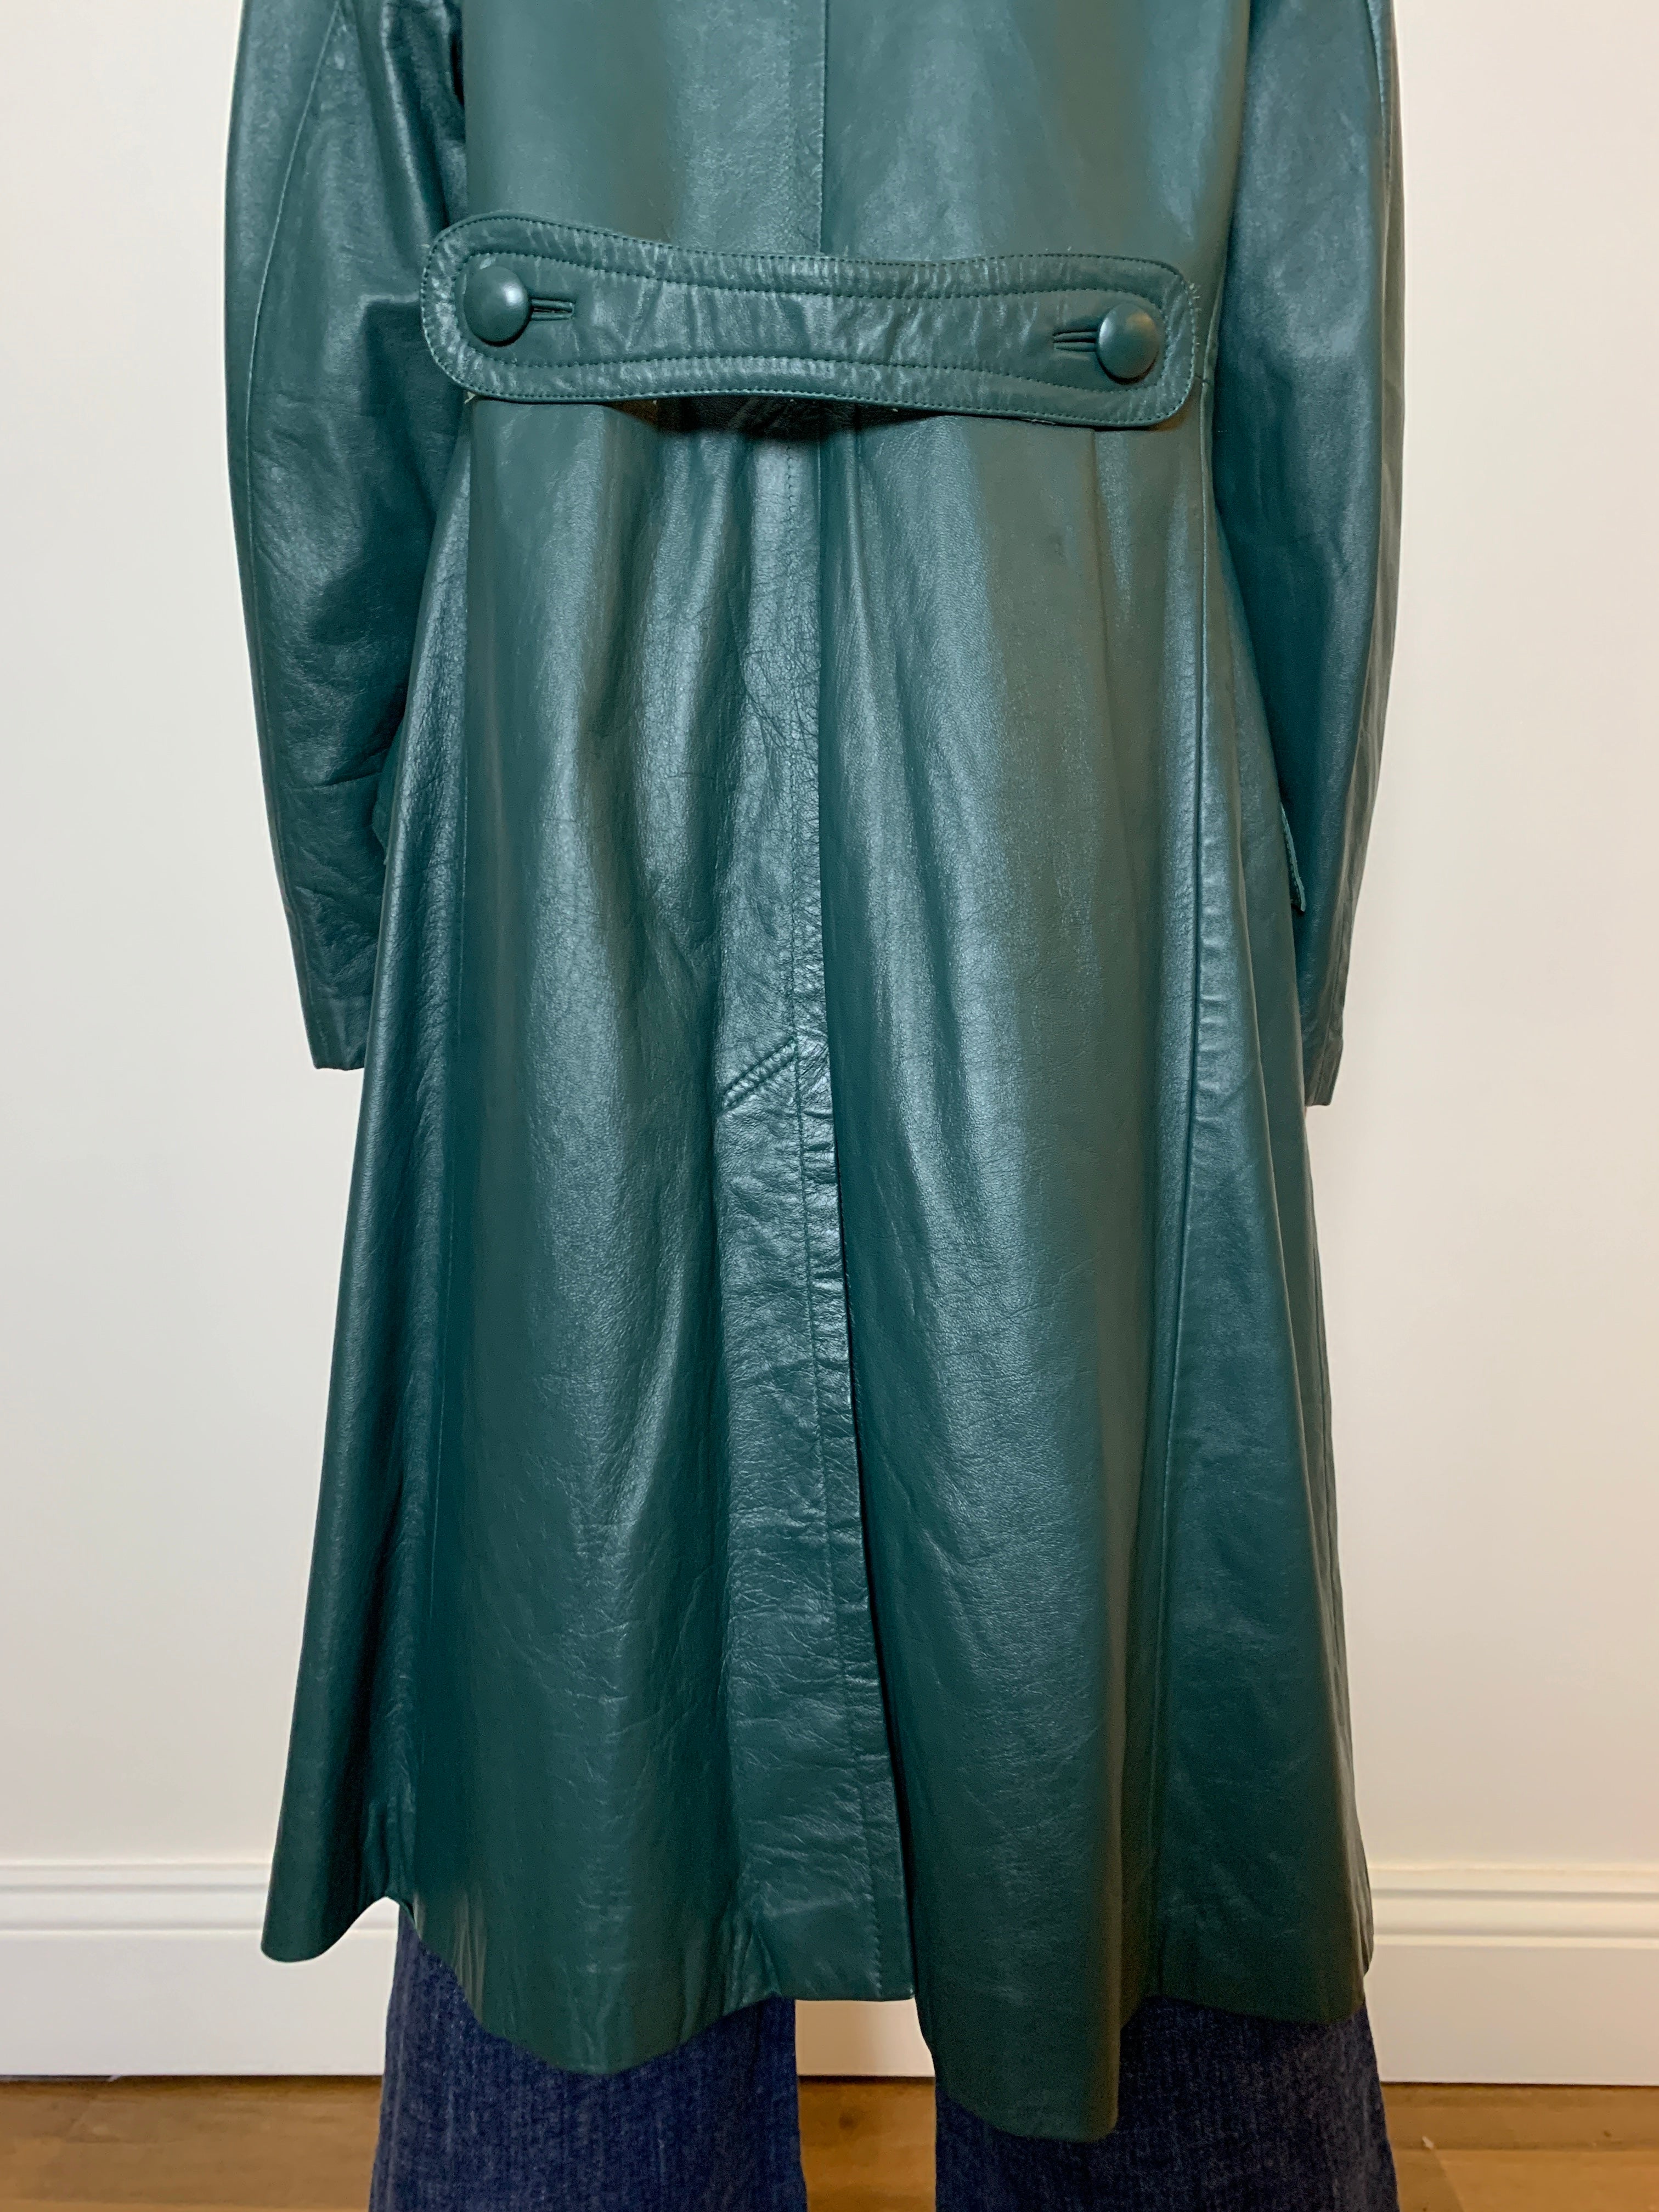 Vintage green leather trench coat